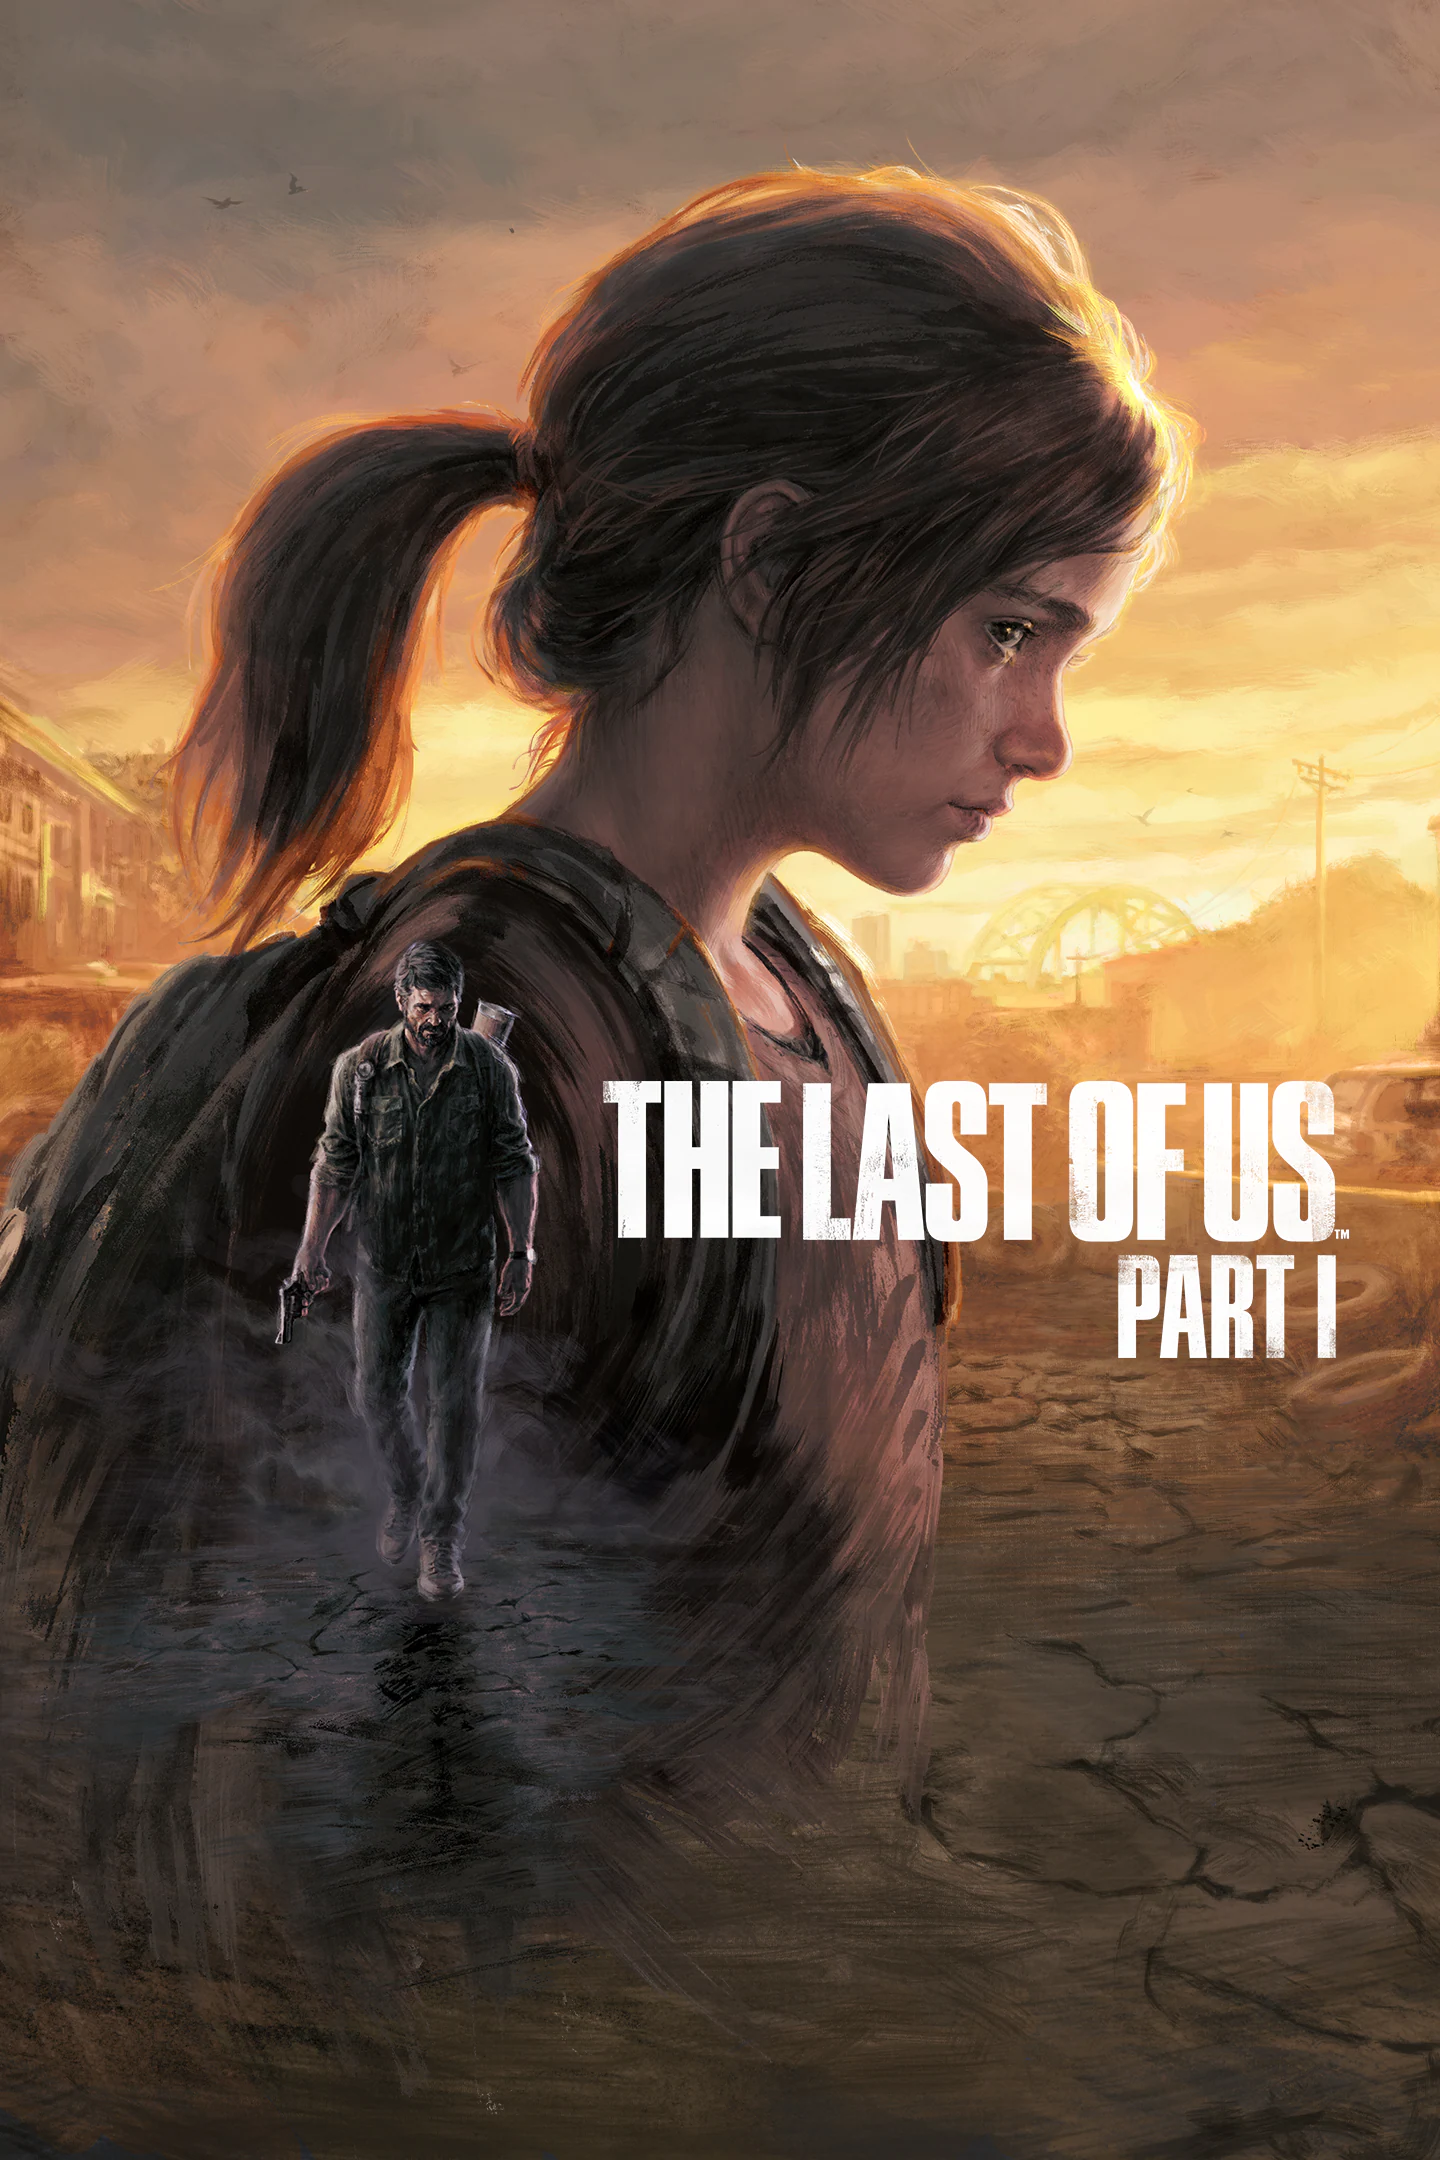 The Last of Us Part I Digital Deluxe Edition Download